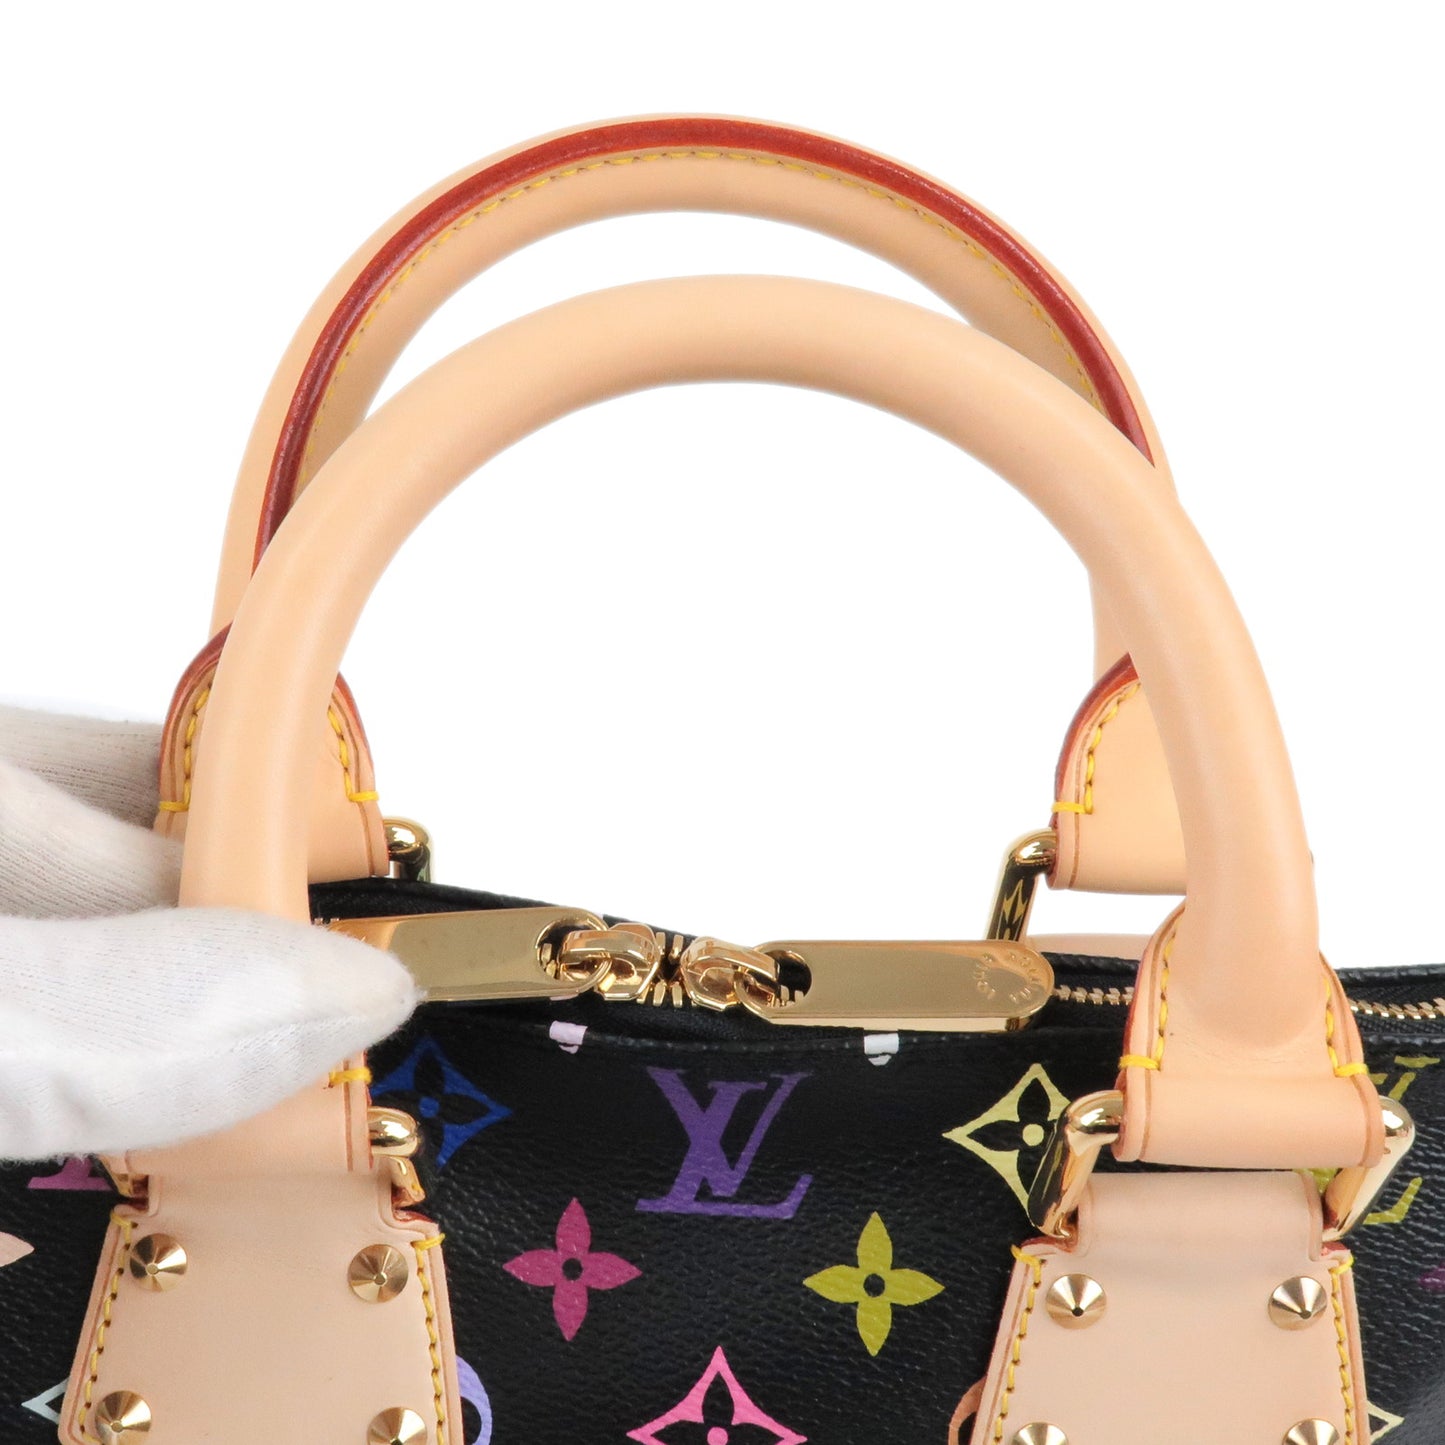 A monogrammed Louis Vuitton bag in all hues (and for many moods)